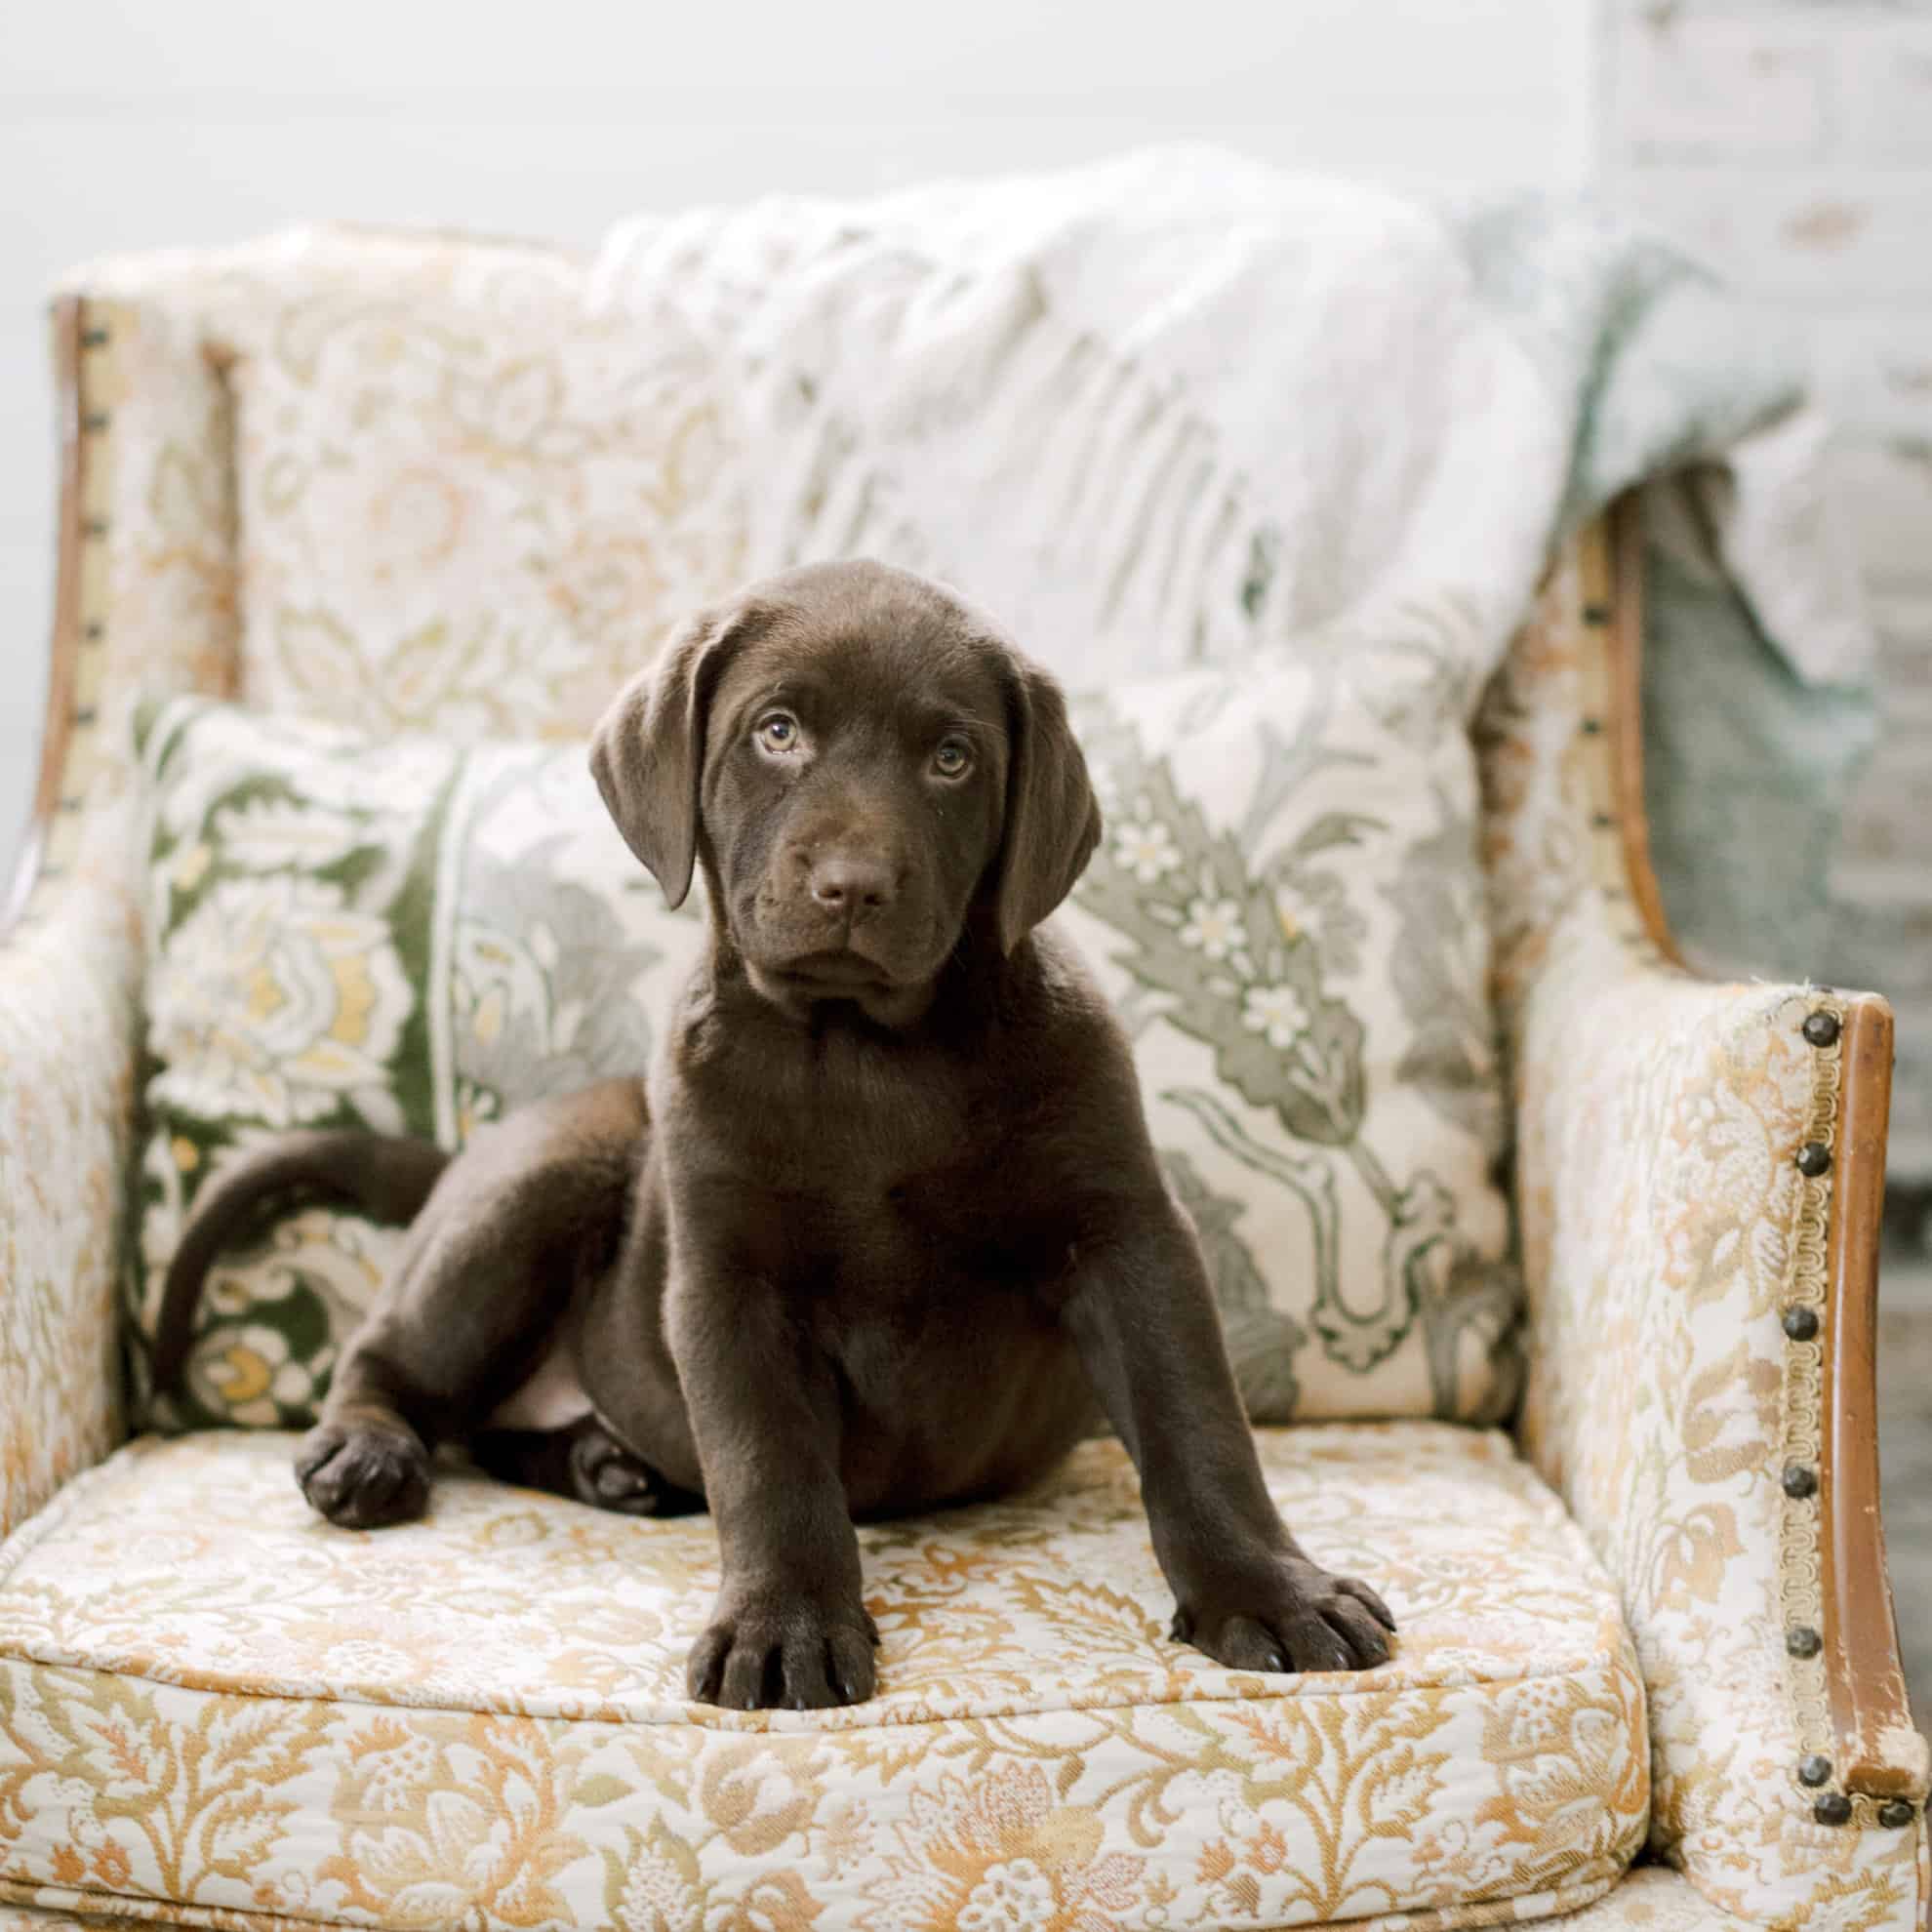 heritage creek labs chocolate labrador puppy cute puppy sitting on a flower chair in a home as the family dog bird hunting dog indiana dog breeder